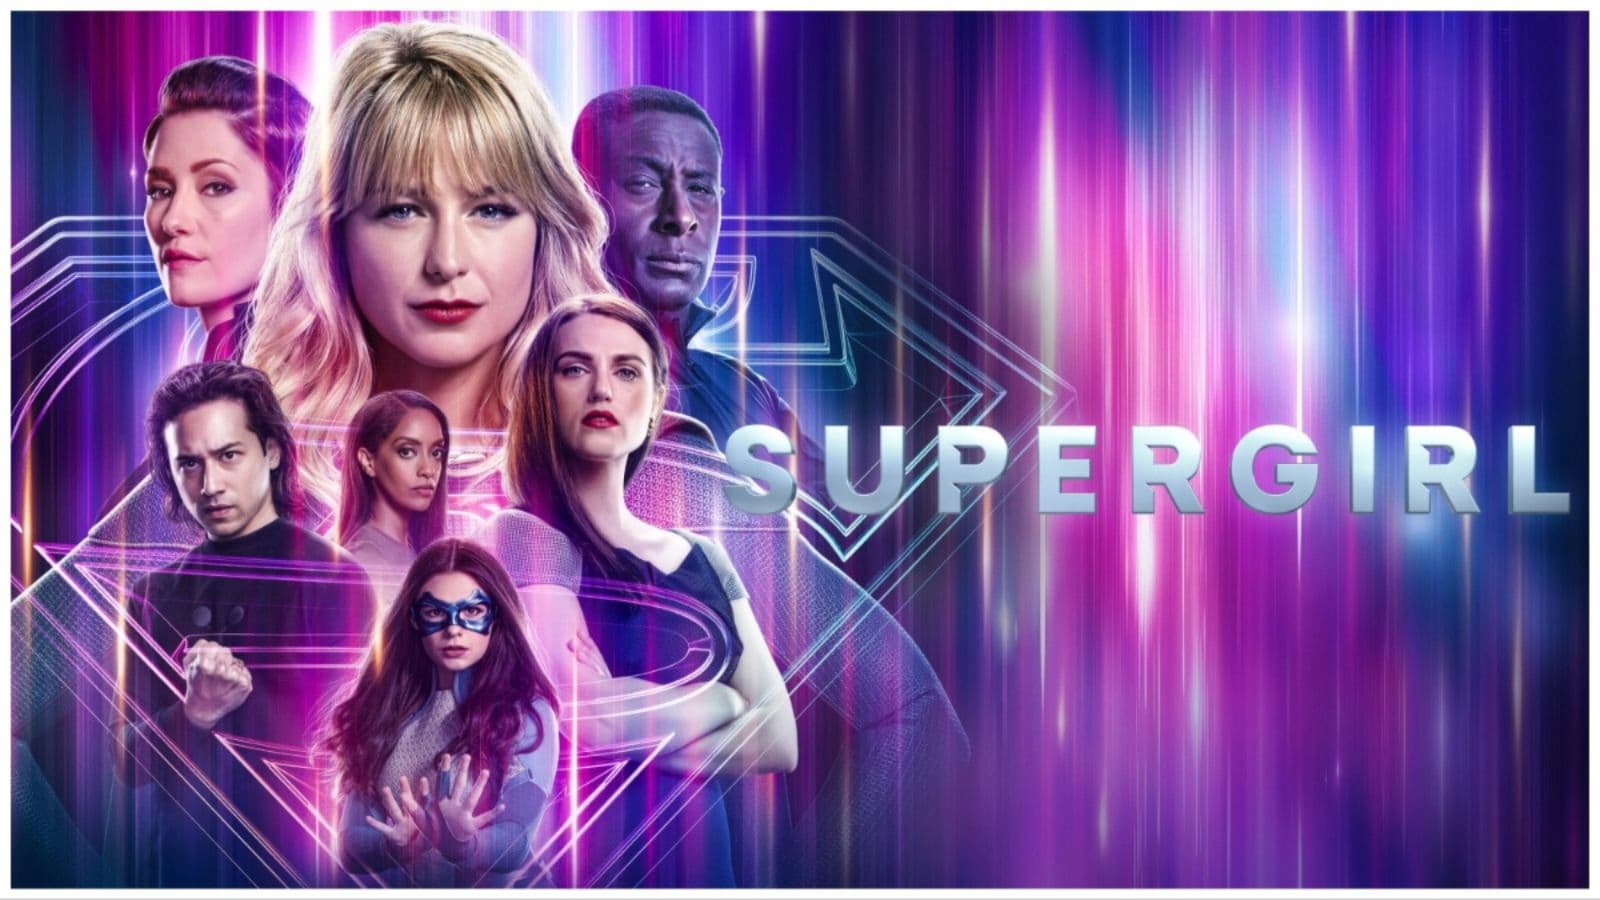 Supergirl Season 6 Now Available for Streaming on Netflix